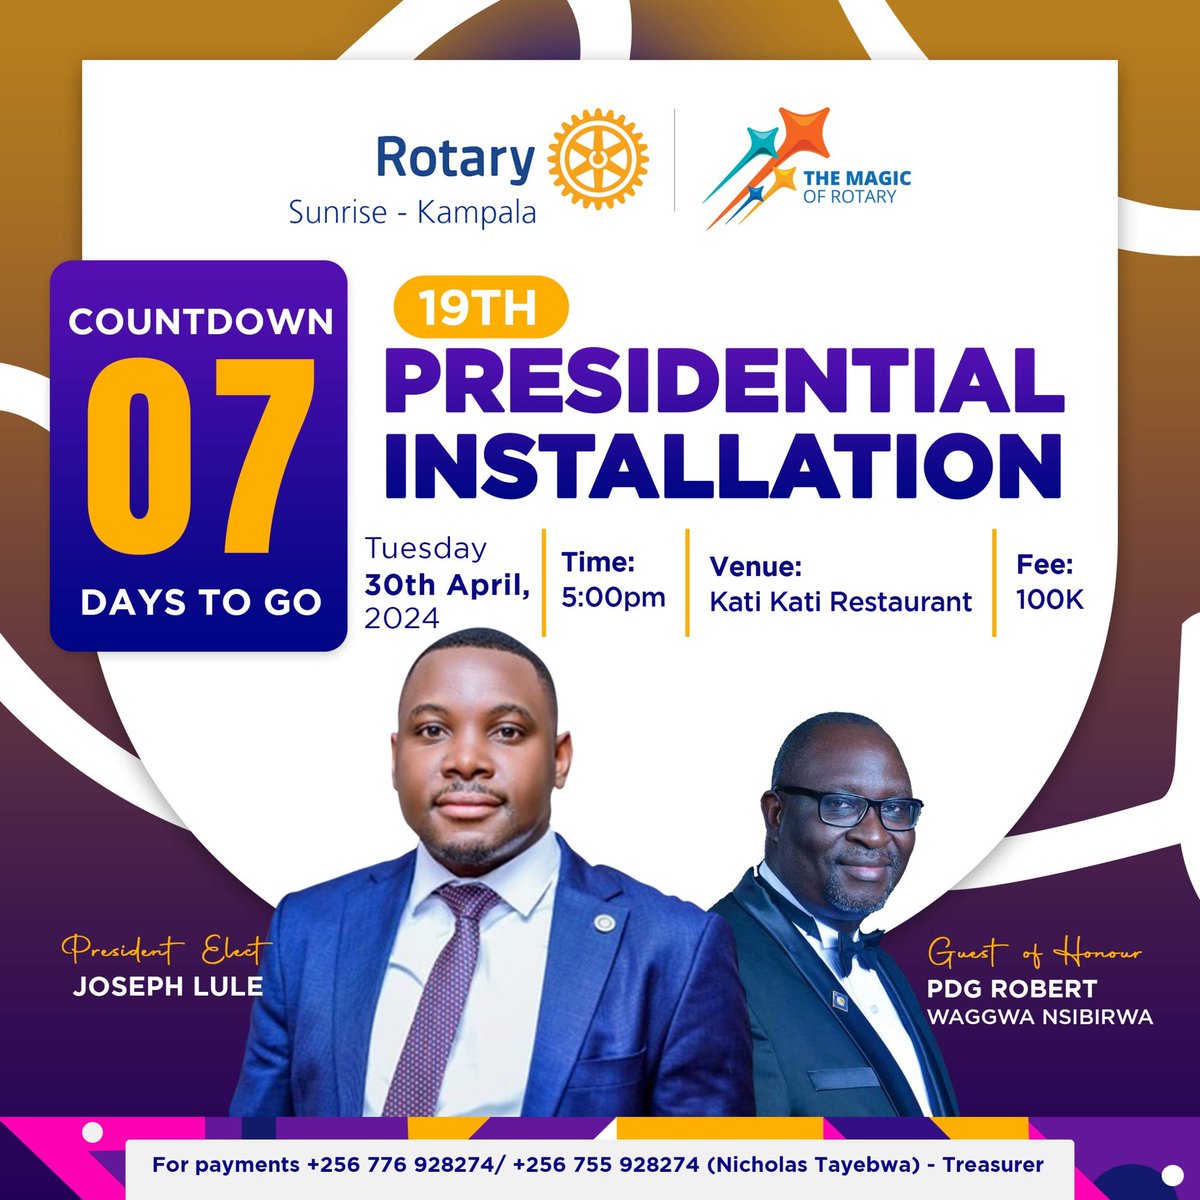 Look between S and F to know why your not supposed to miss this #19PresidentialInstallation of PE @Lulejoseph of Rotary Club of Sunrise-kampala